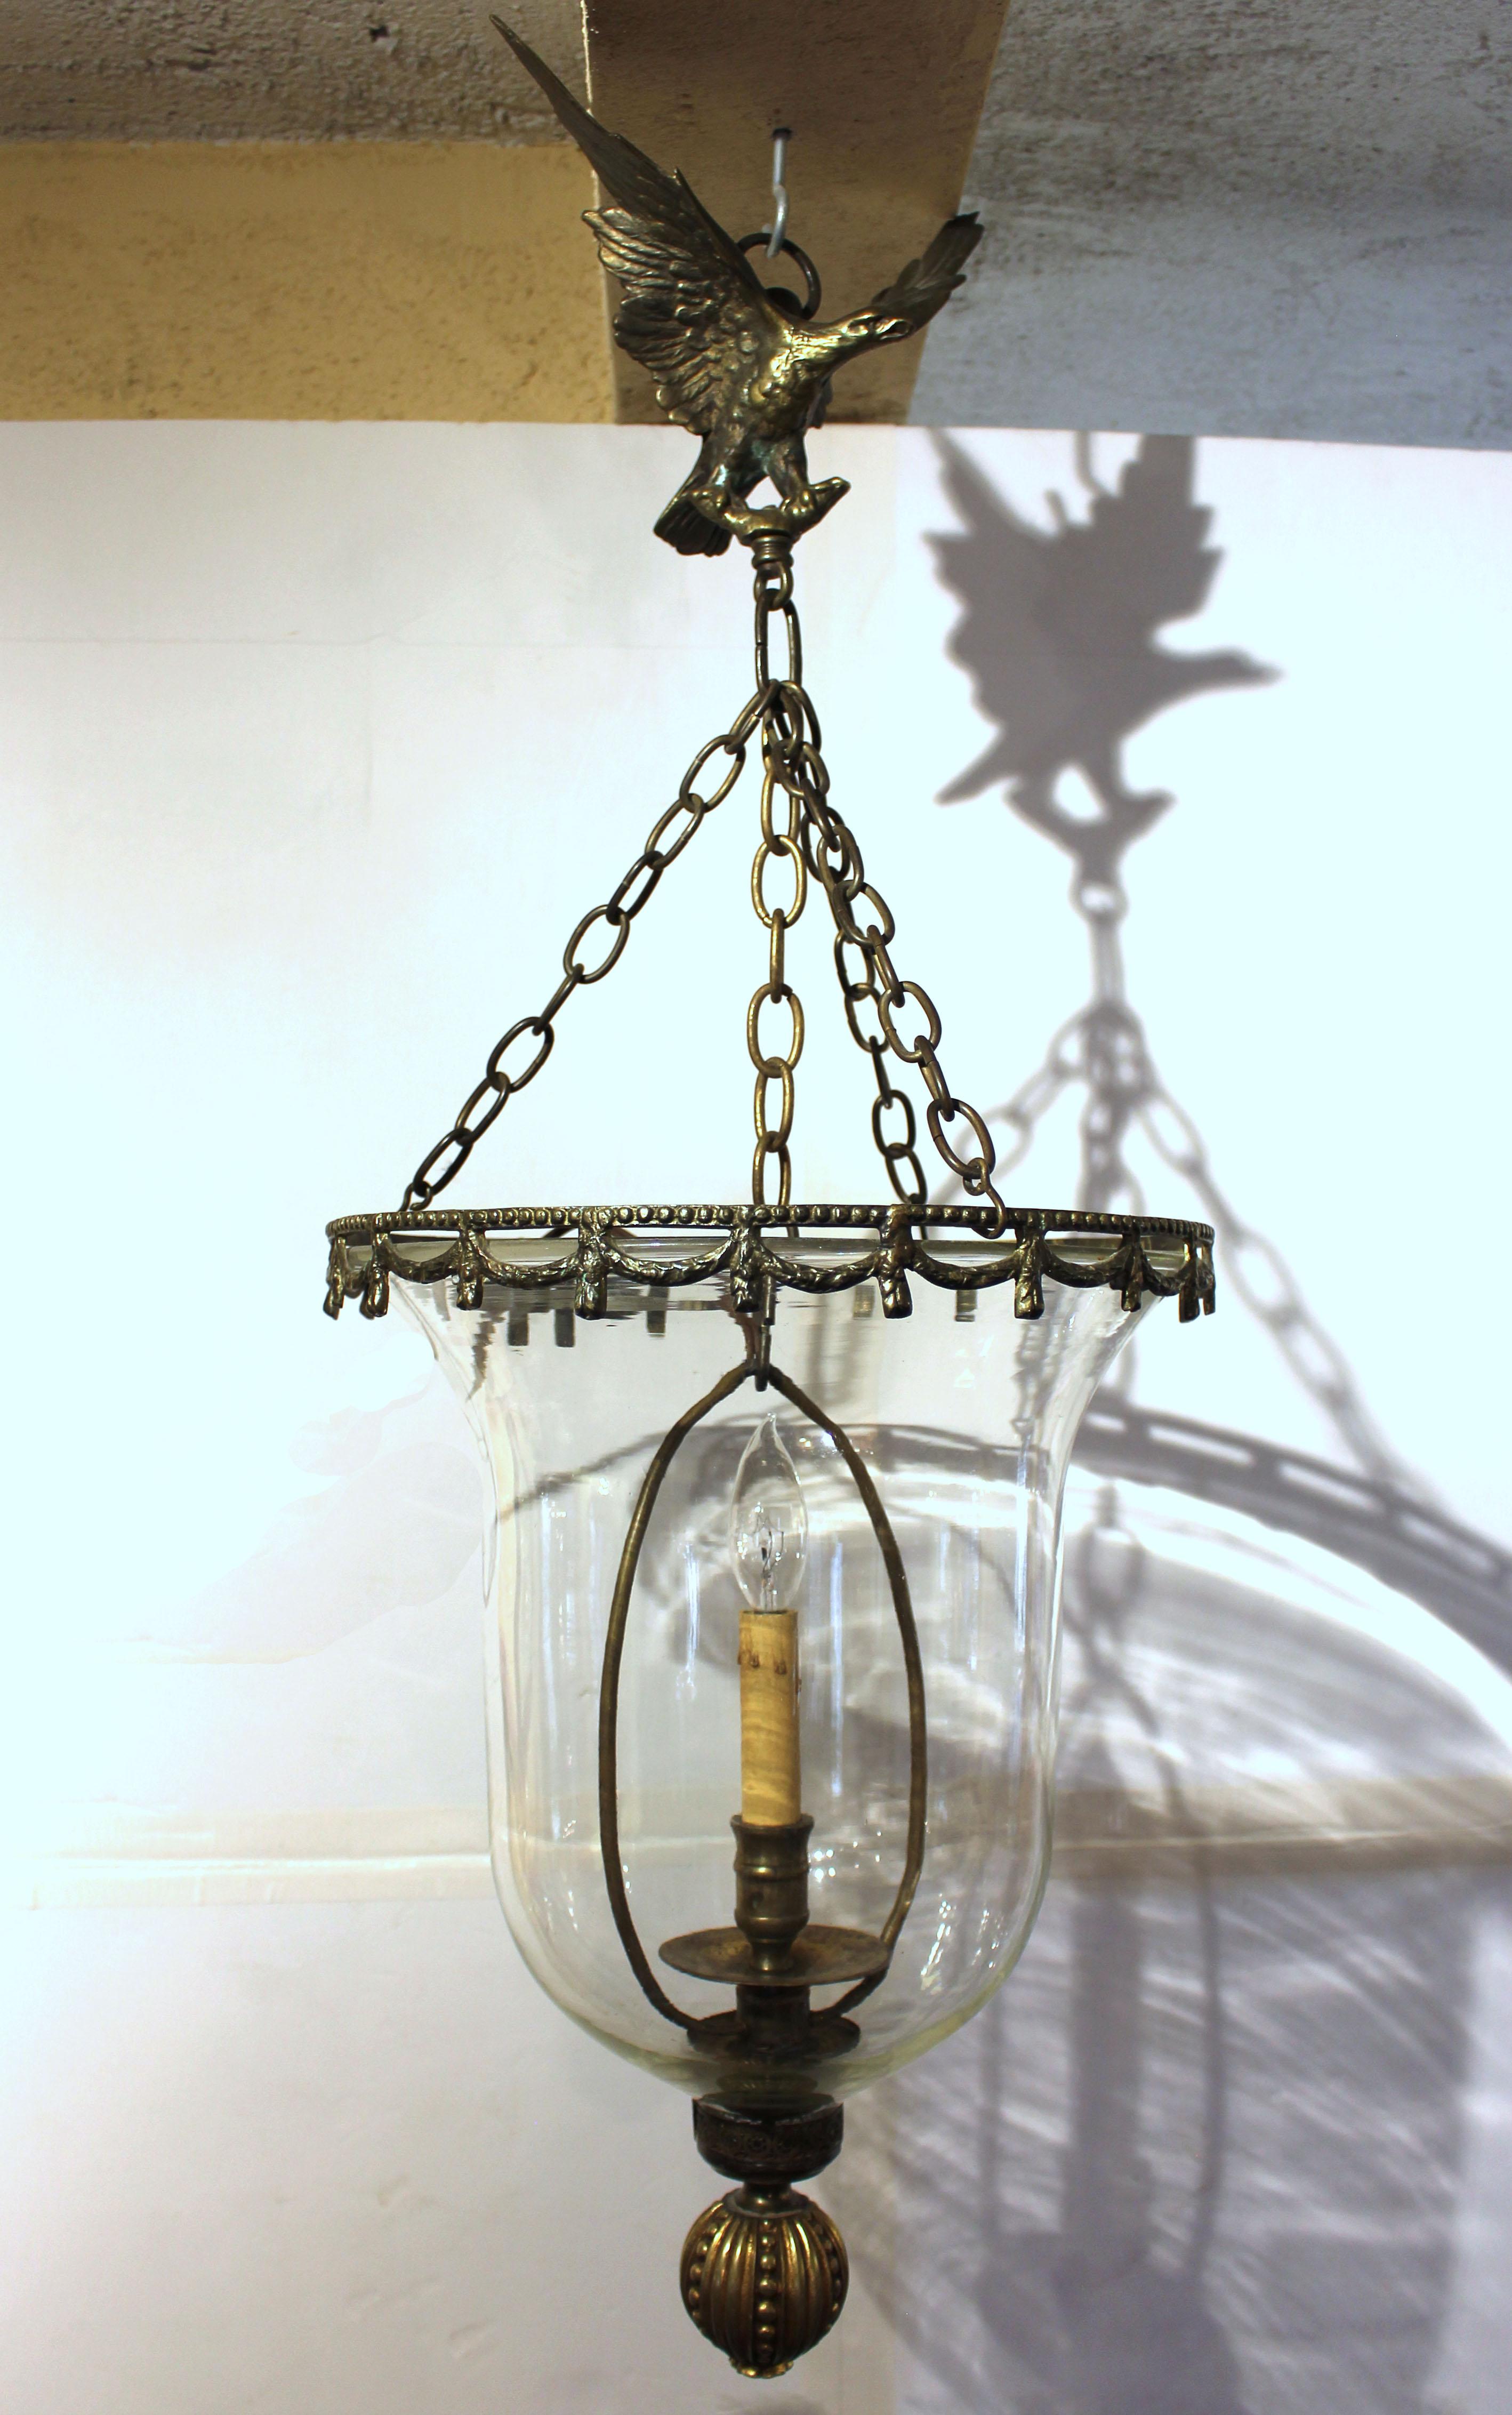 Early 19th century eagle mounted hall lantern, Anglo-American. Cast & gilt brass with blown glass tapering to pierced collar to draw air. Current electrical system replaces a single candle. Currently designed for a ceiling canopy or hook. 
13.75